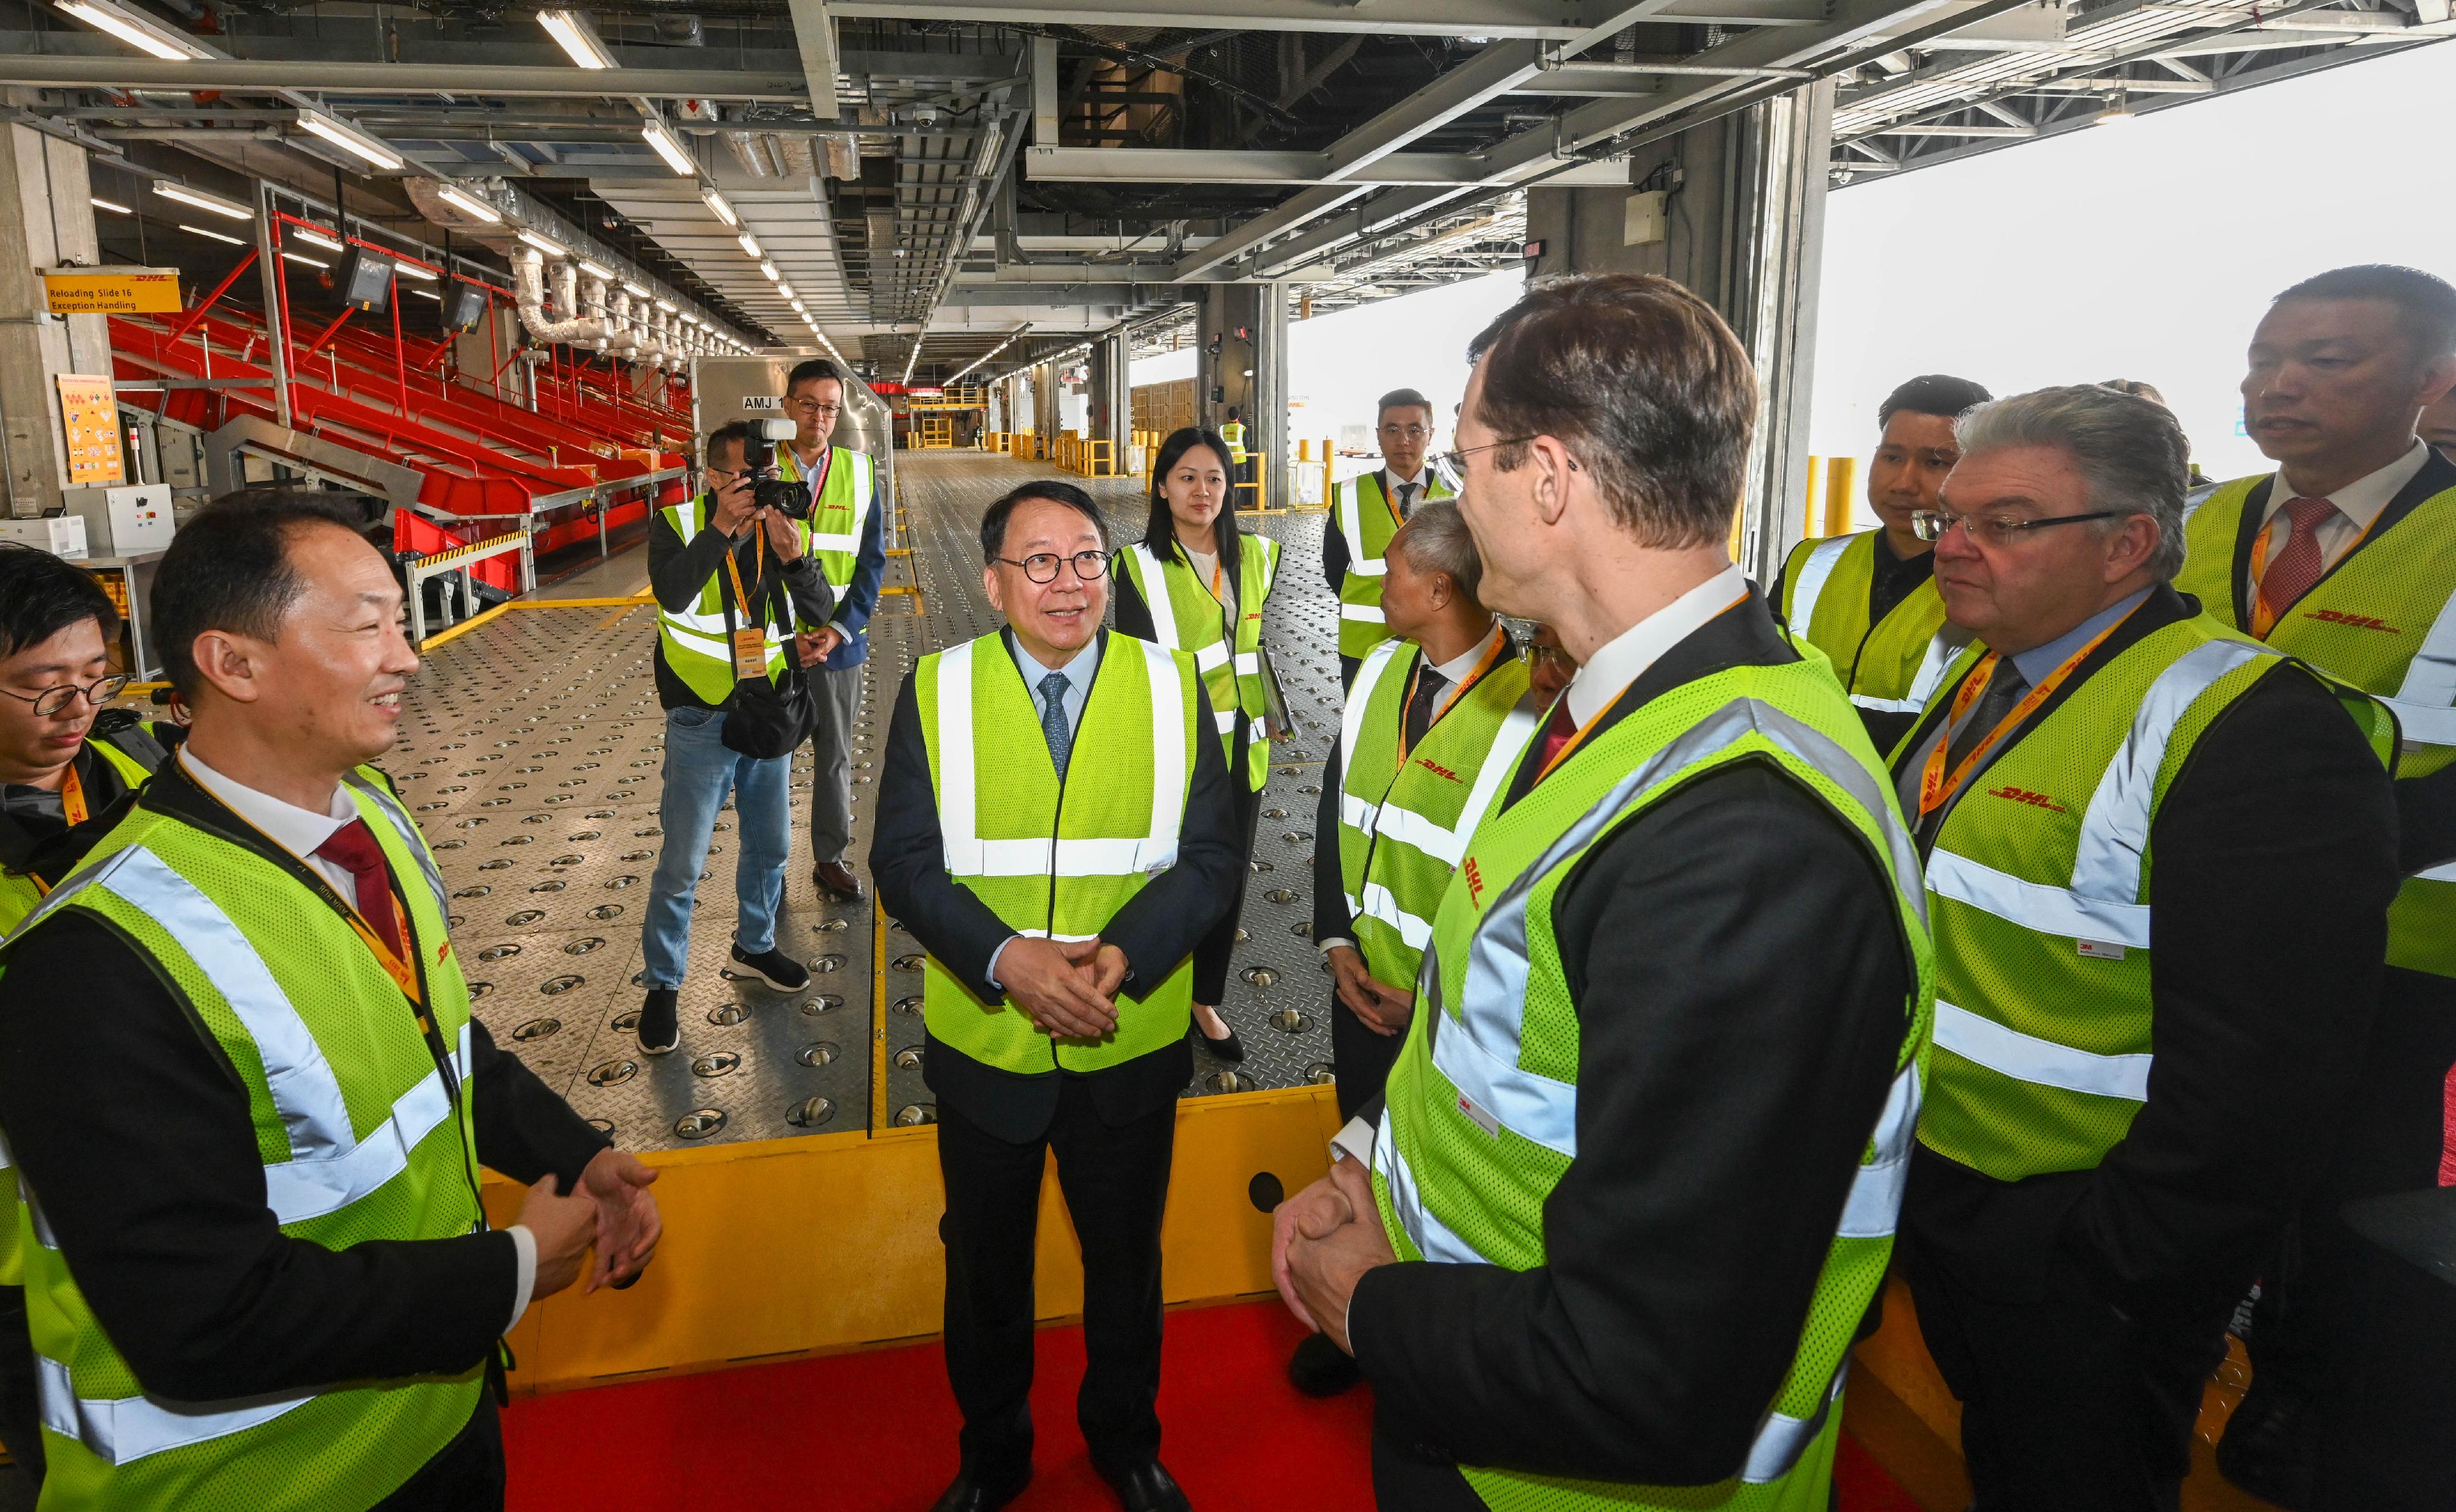 The Chief Secretary for Administration, Mr Chan Kwok-ki, attended the DHL Central Asia Hub Phase 3 Grand Opening today (November 14). Photo shows Mr Chan (third left) touring the expanded Central Asia Hub.